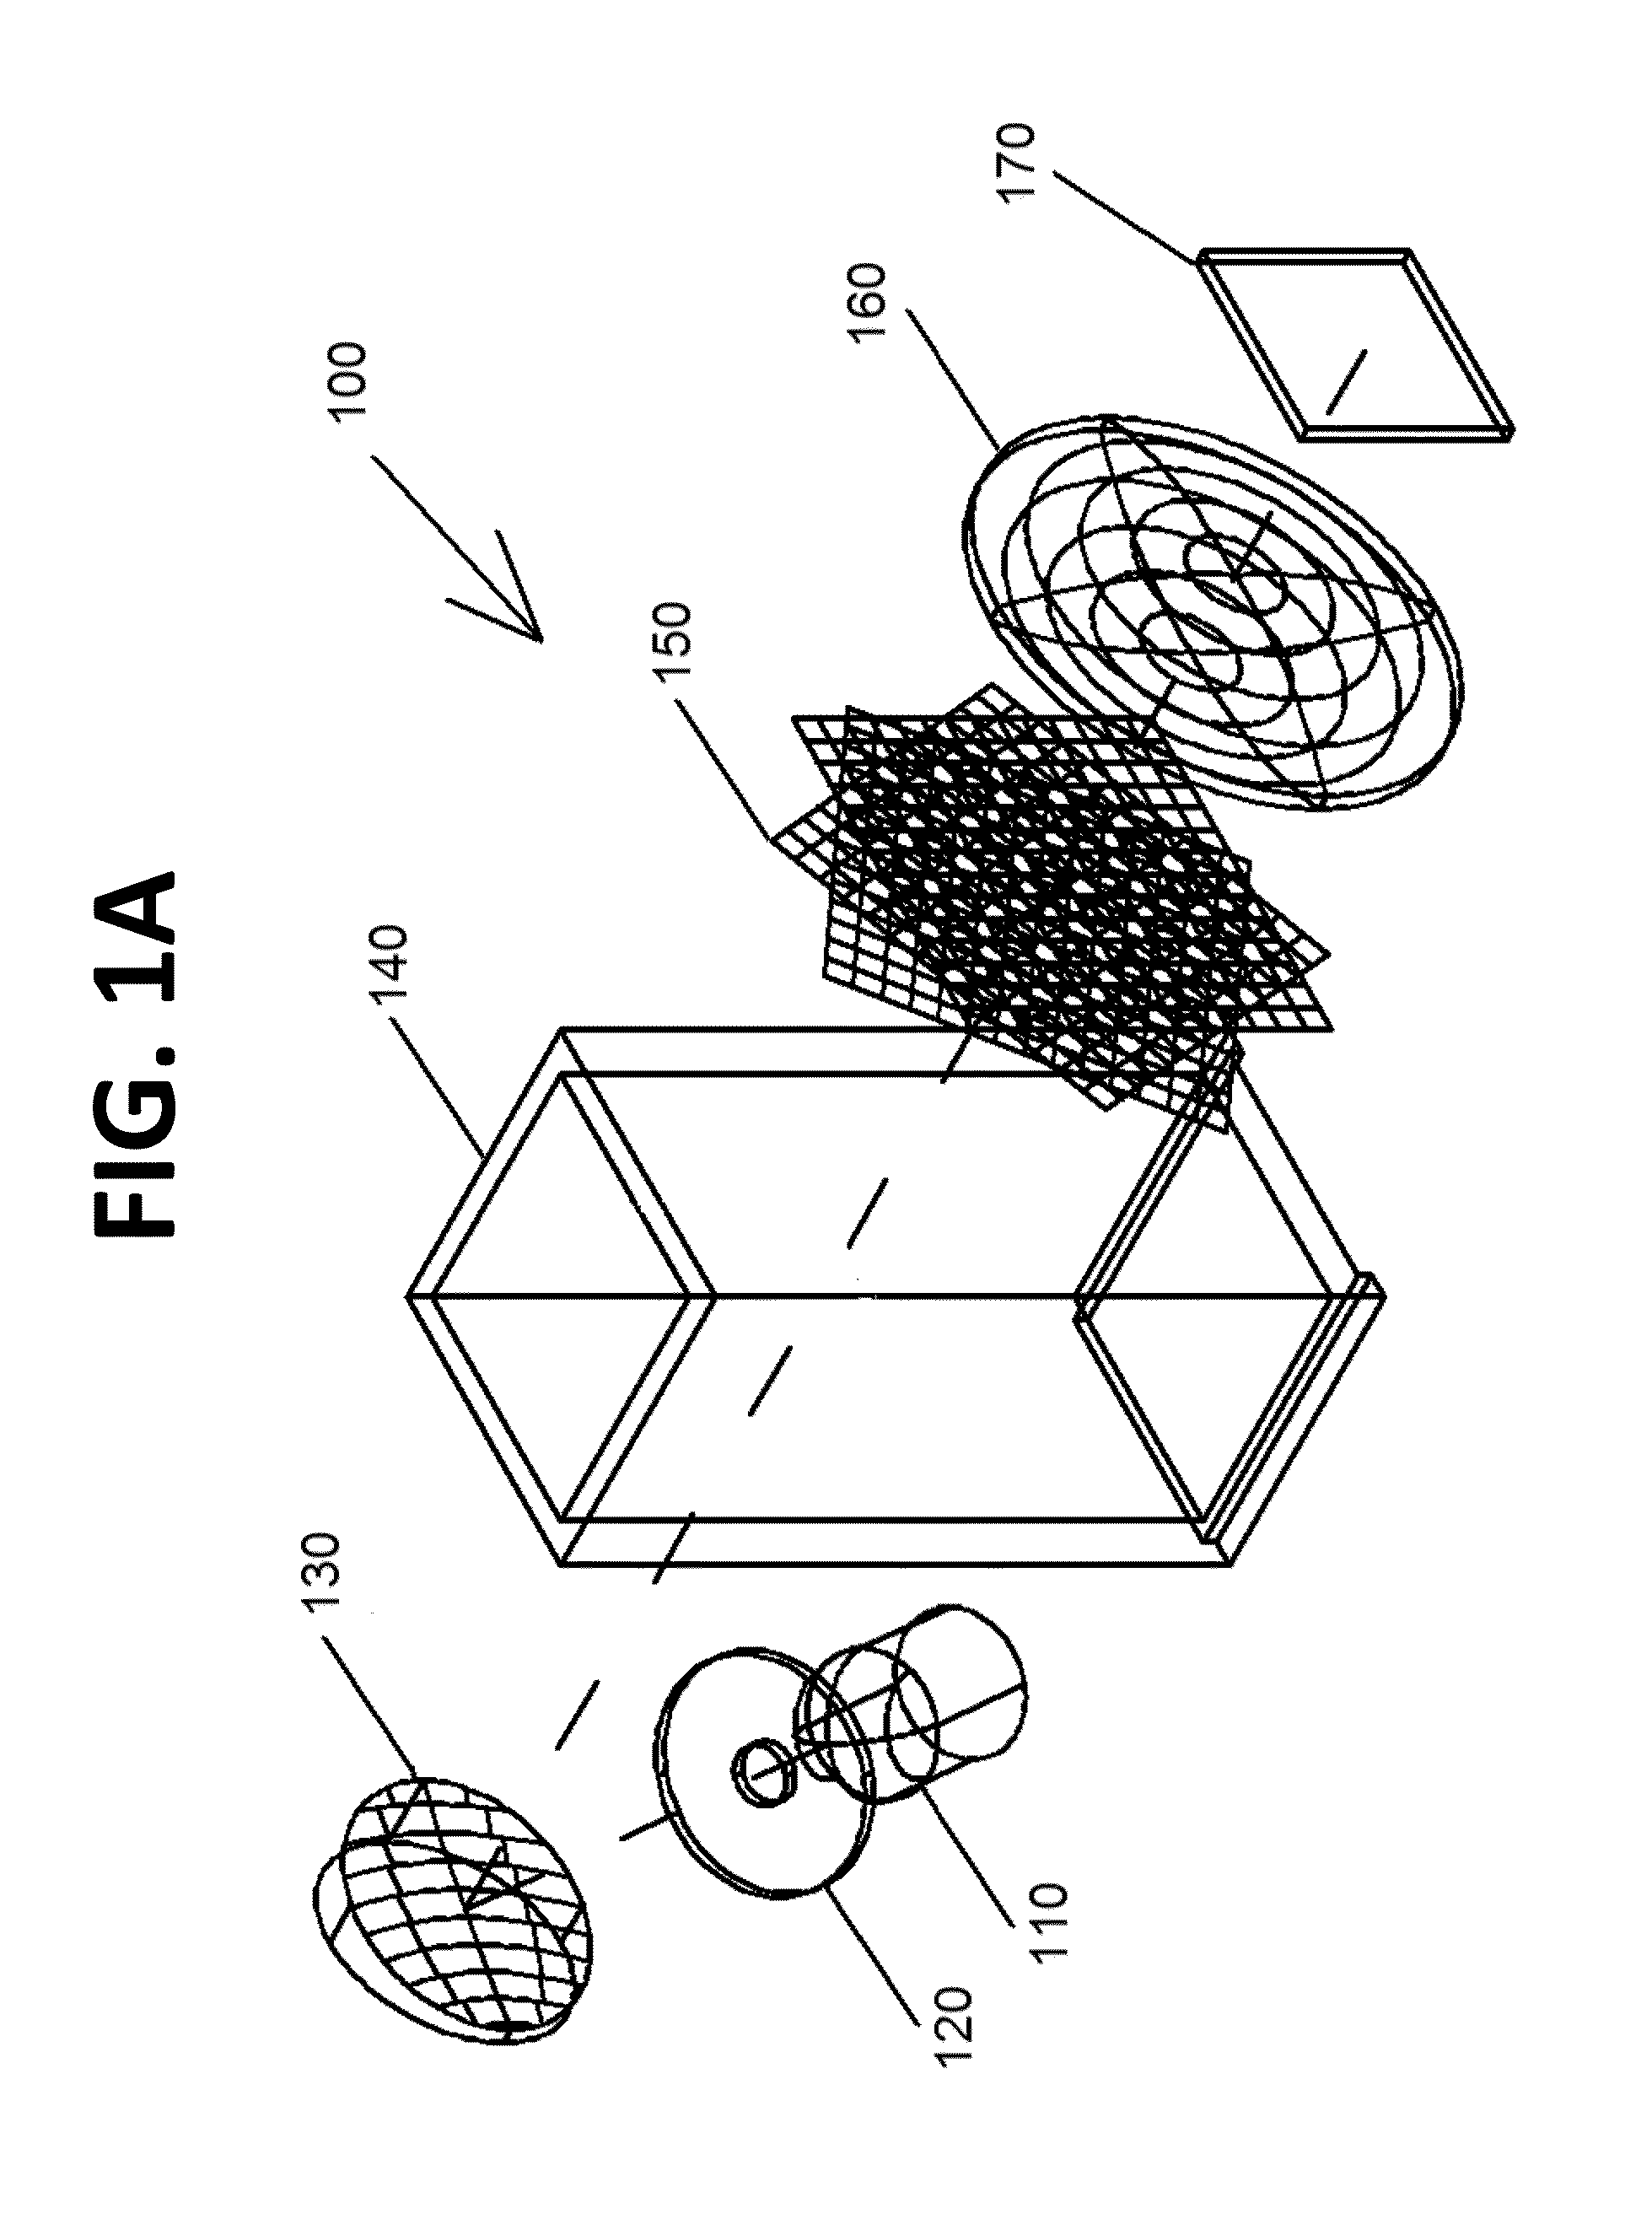 Energy dispersion device